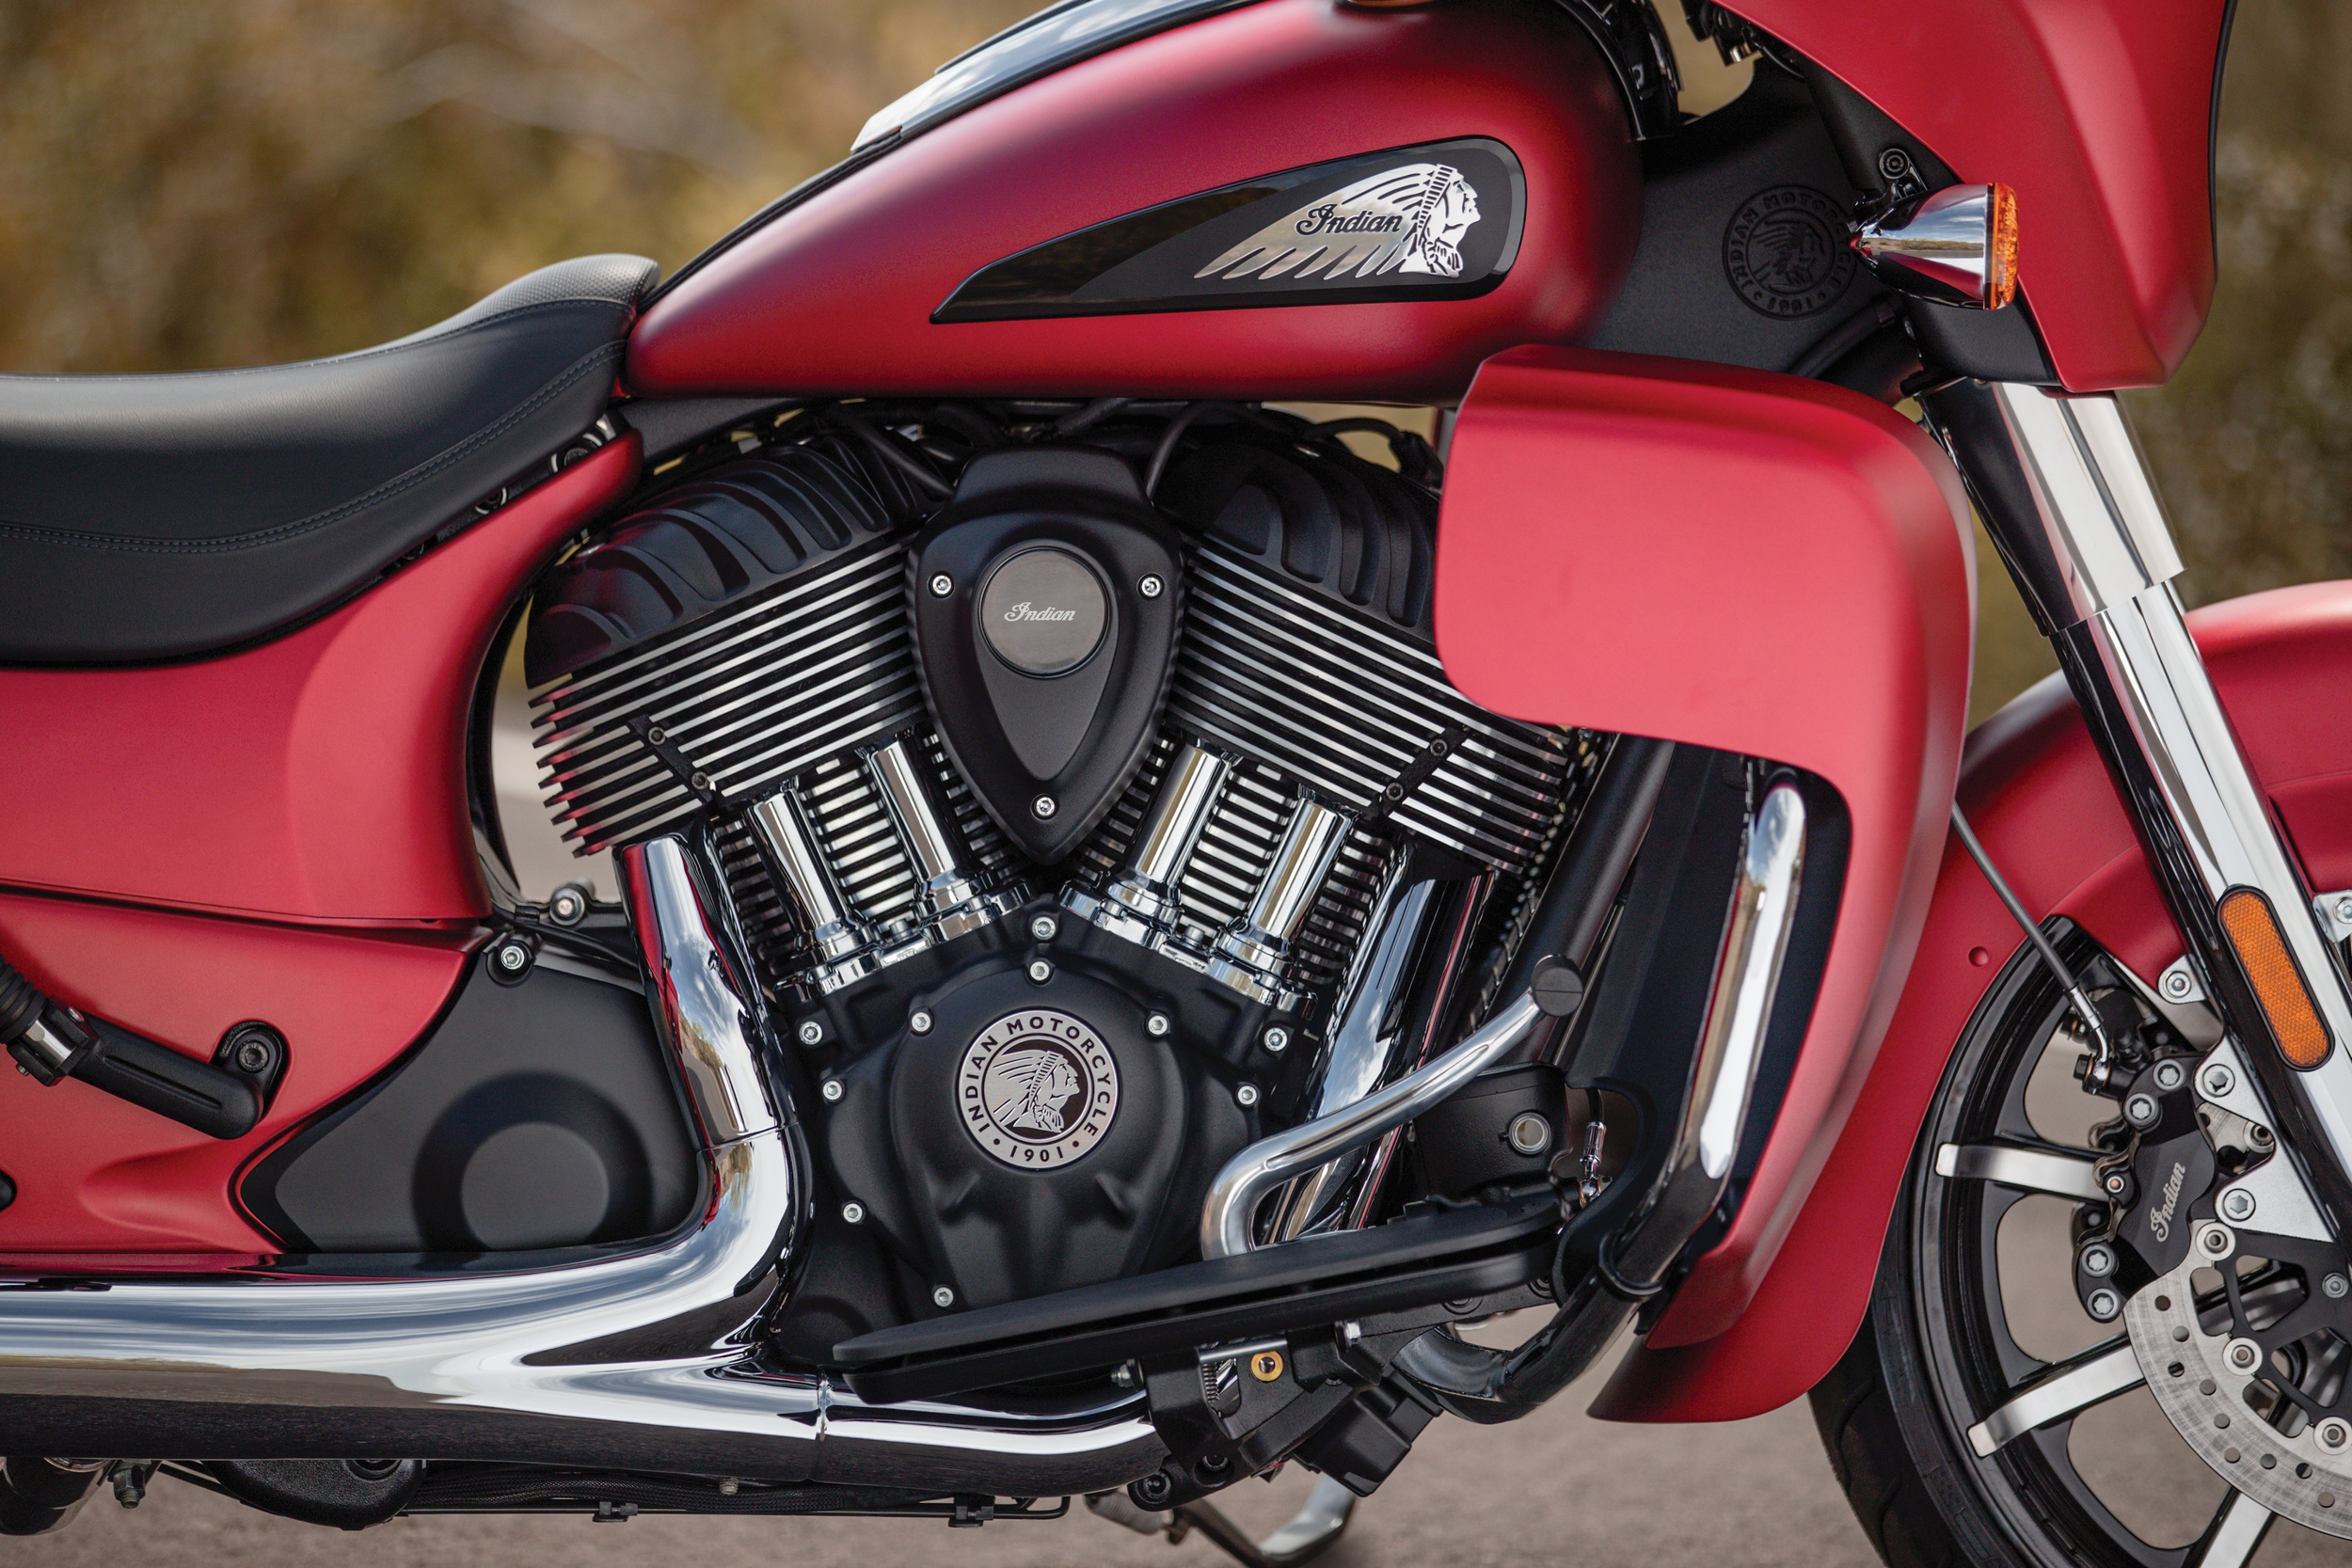 Indian Chieftain Elite 2020 Thunder Stroke 116 Thunder Black Vivid Crystal-Wildfire Red Candy